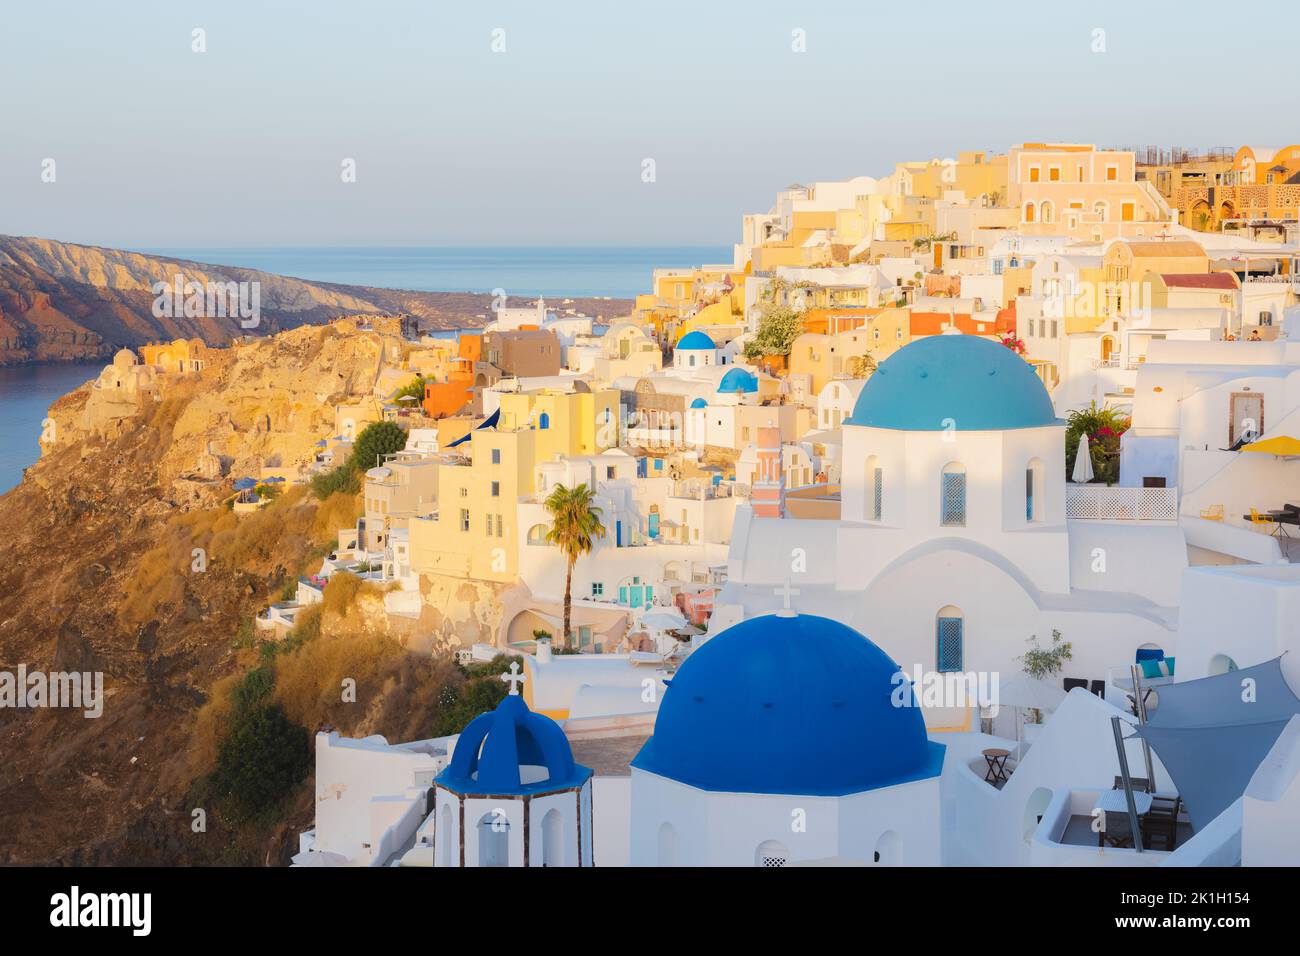 Golden hour sunlight over traditional white wash buildings and colourful blue dome churches at the popular seaside tourist resort village of Oia on th Stock Photo